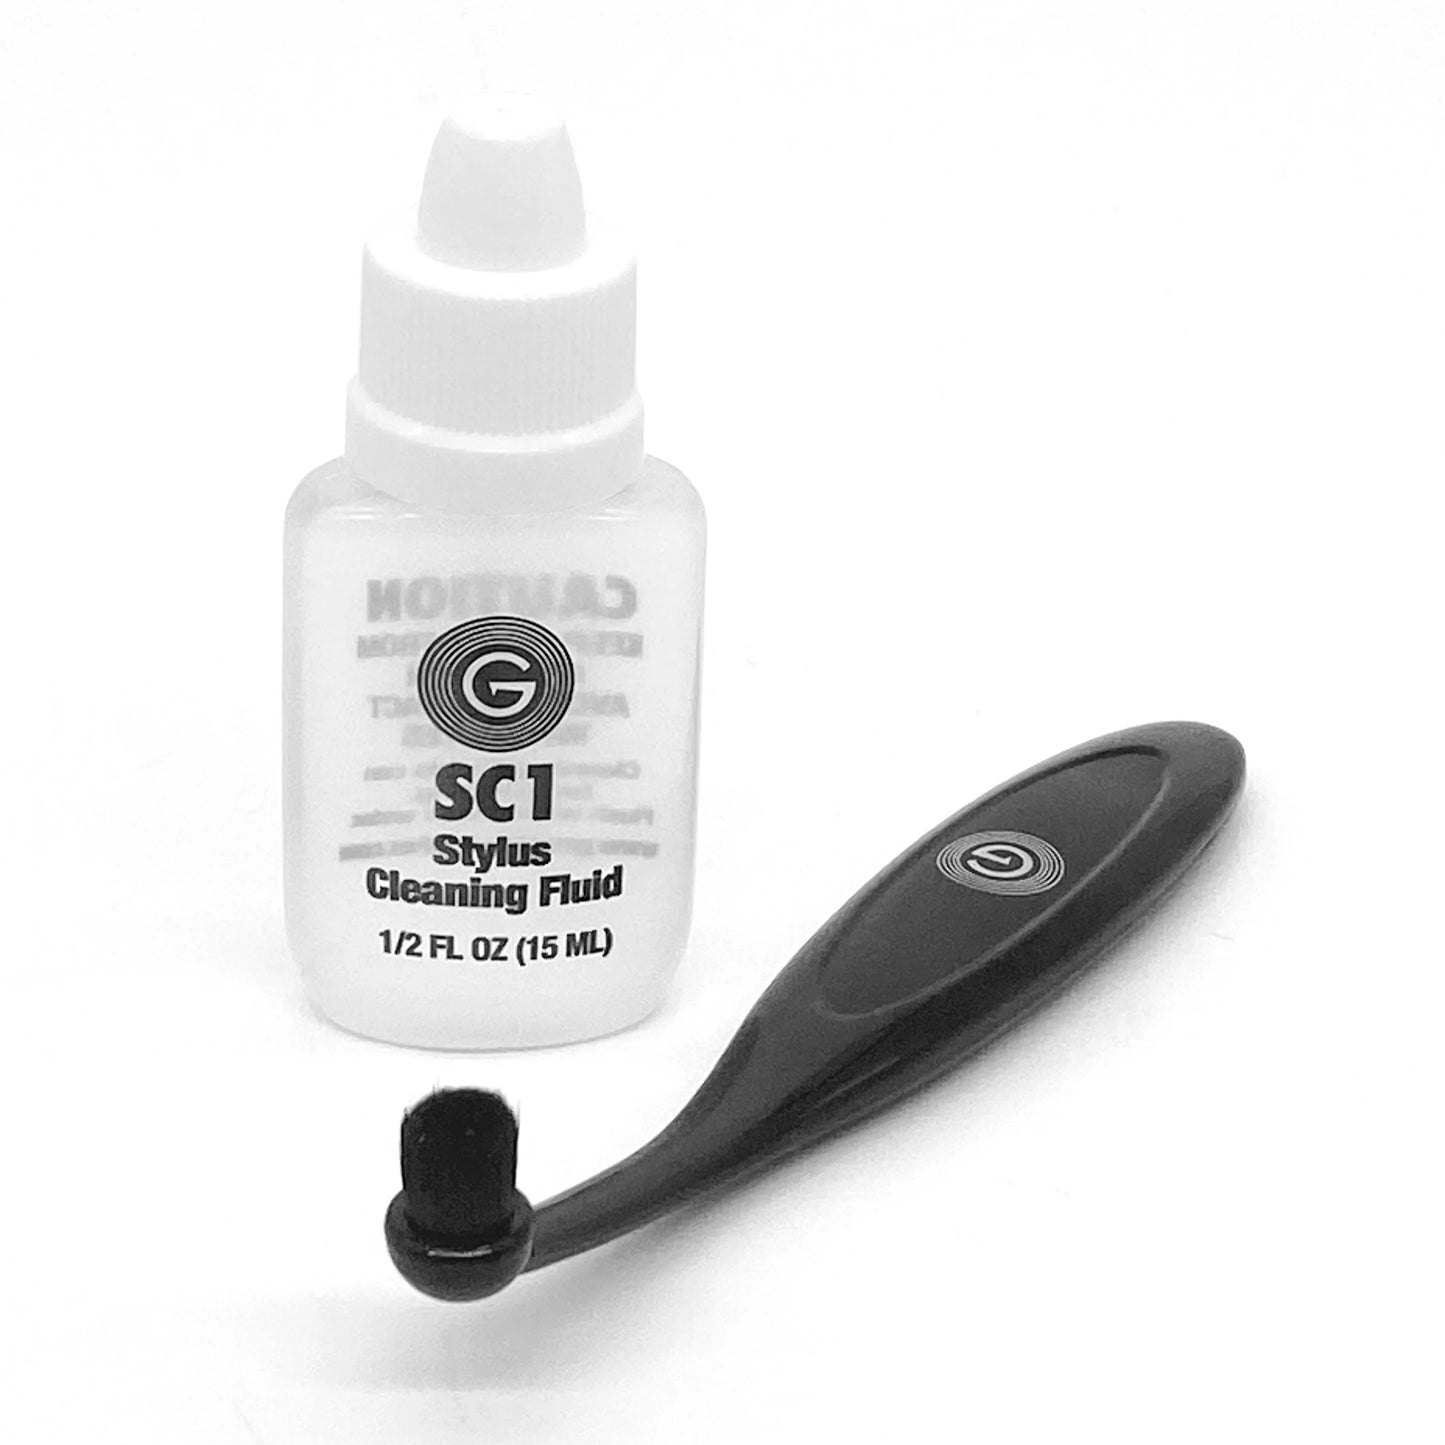 Groovewasher - Stylus Cleaning SC1 Kit